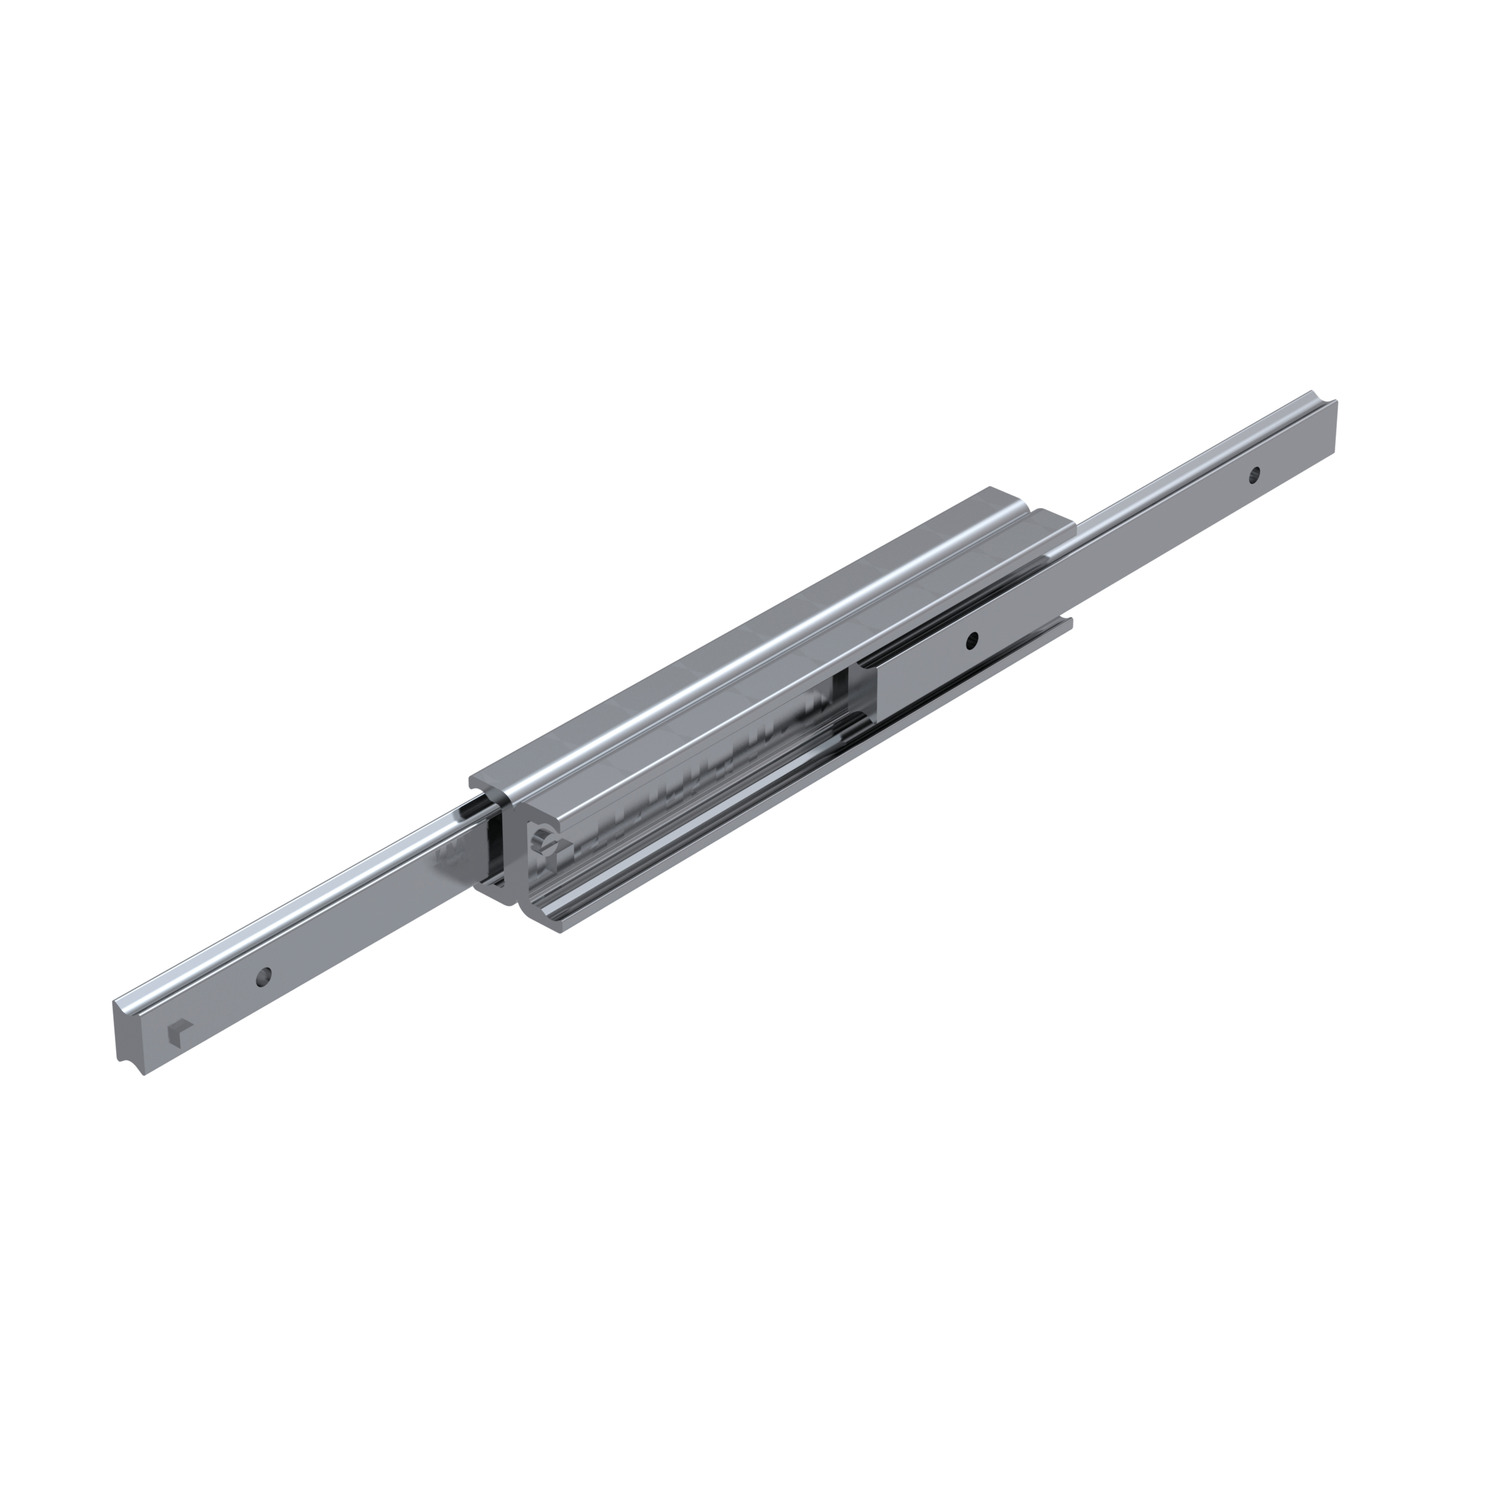 Fully Telescopic Slides Strong and rigid with high load capacities.